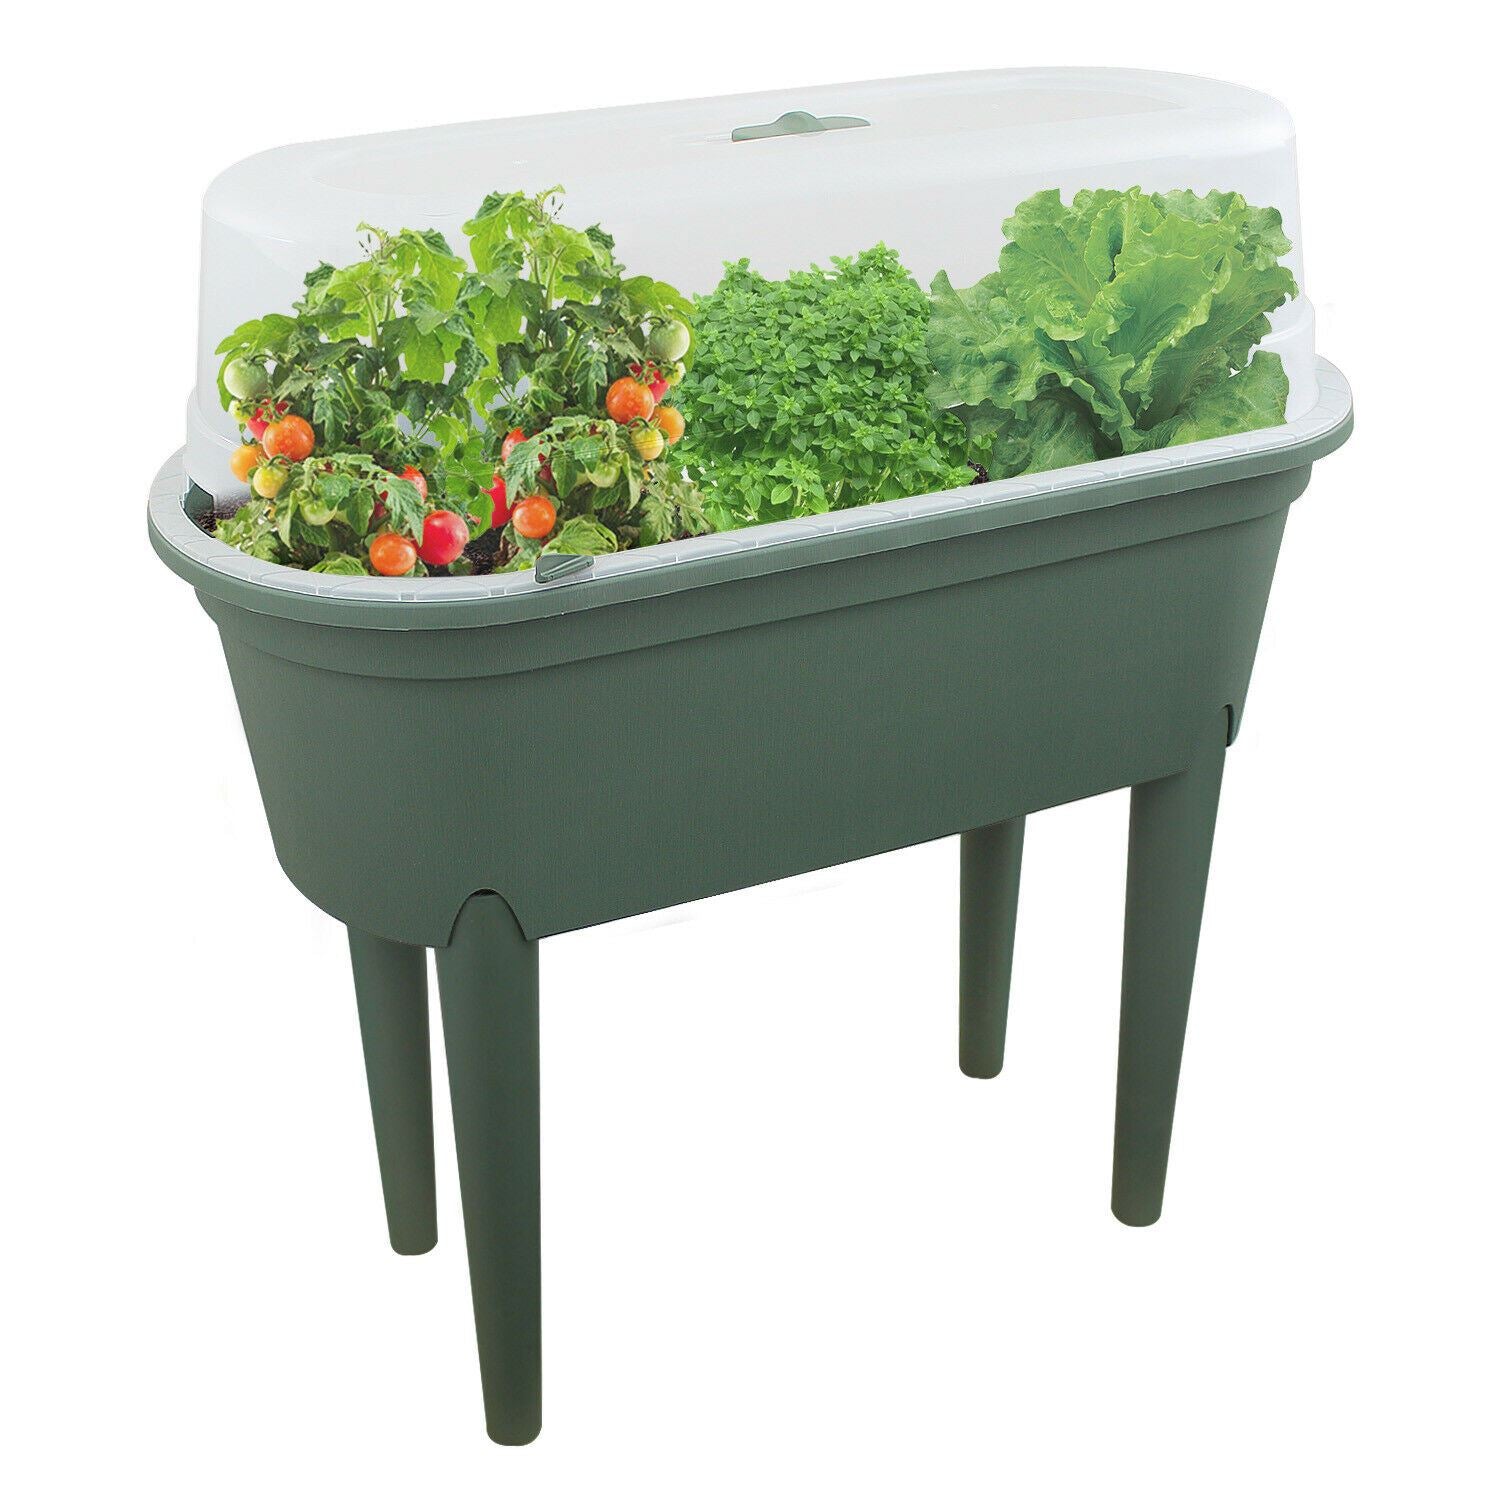 Green Raised Garden Bed Planter With Lid and Legs